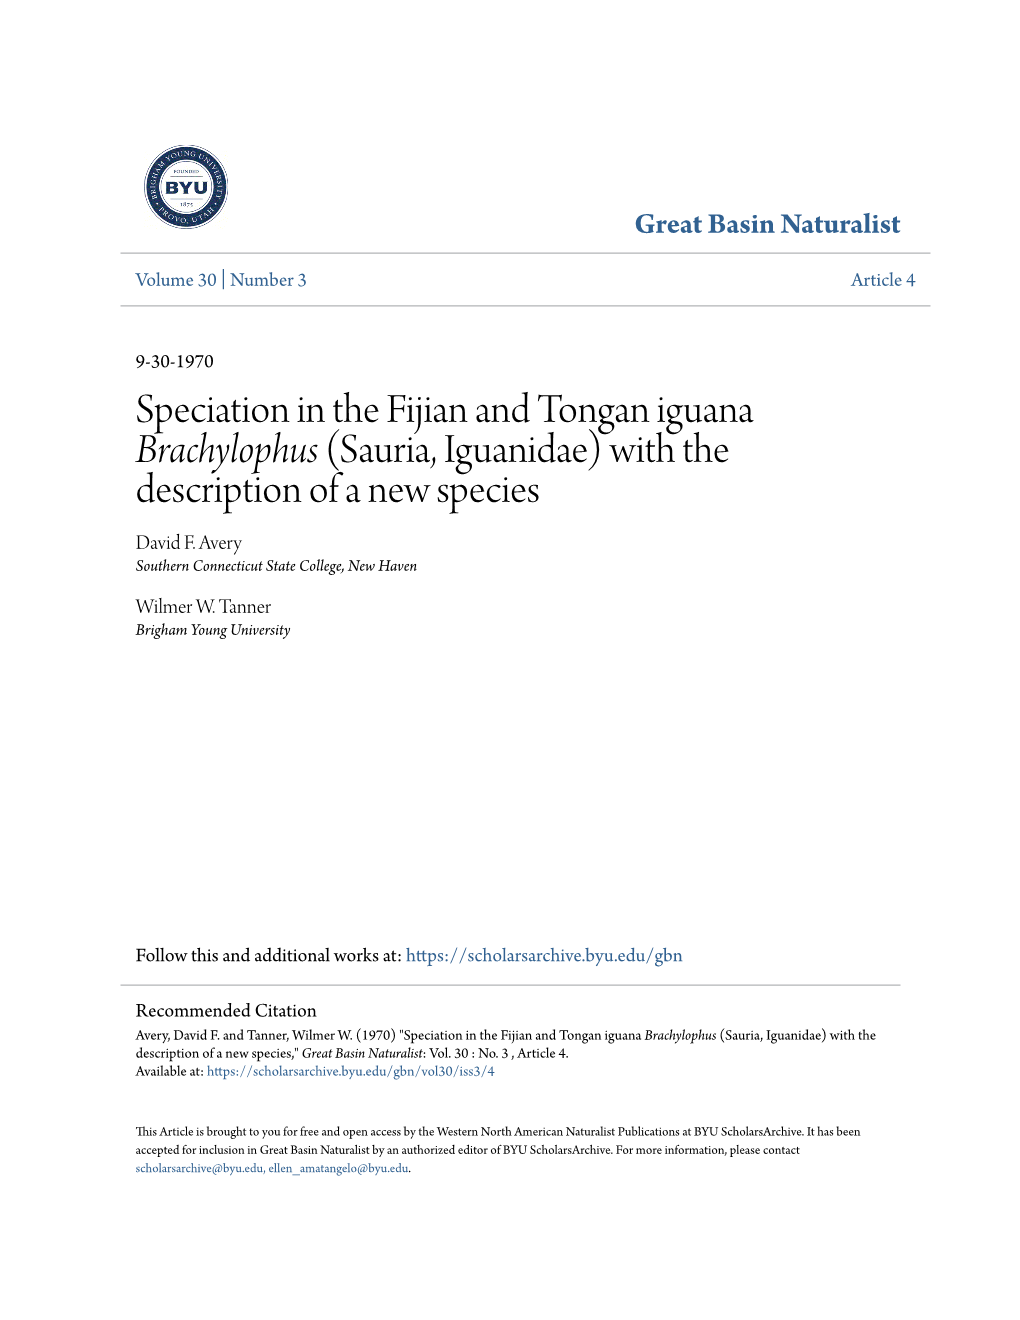 Speciation in the Fijian and Tongan Iguana Brachylophus (Sauria, Iguanidae) with the Description of a New Species David F